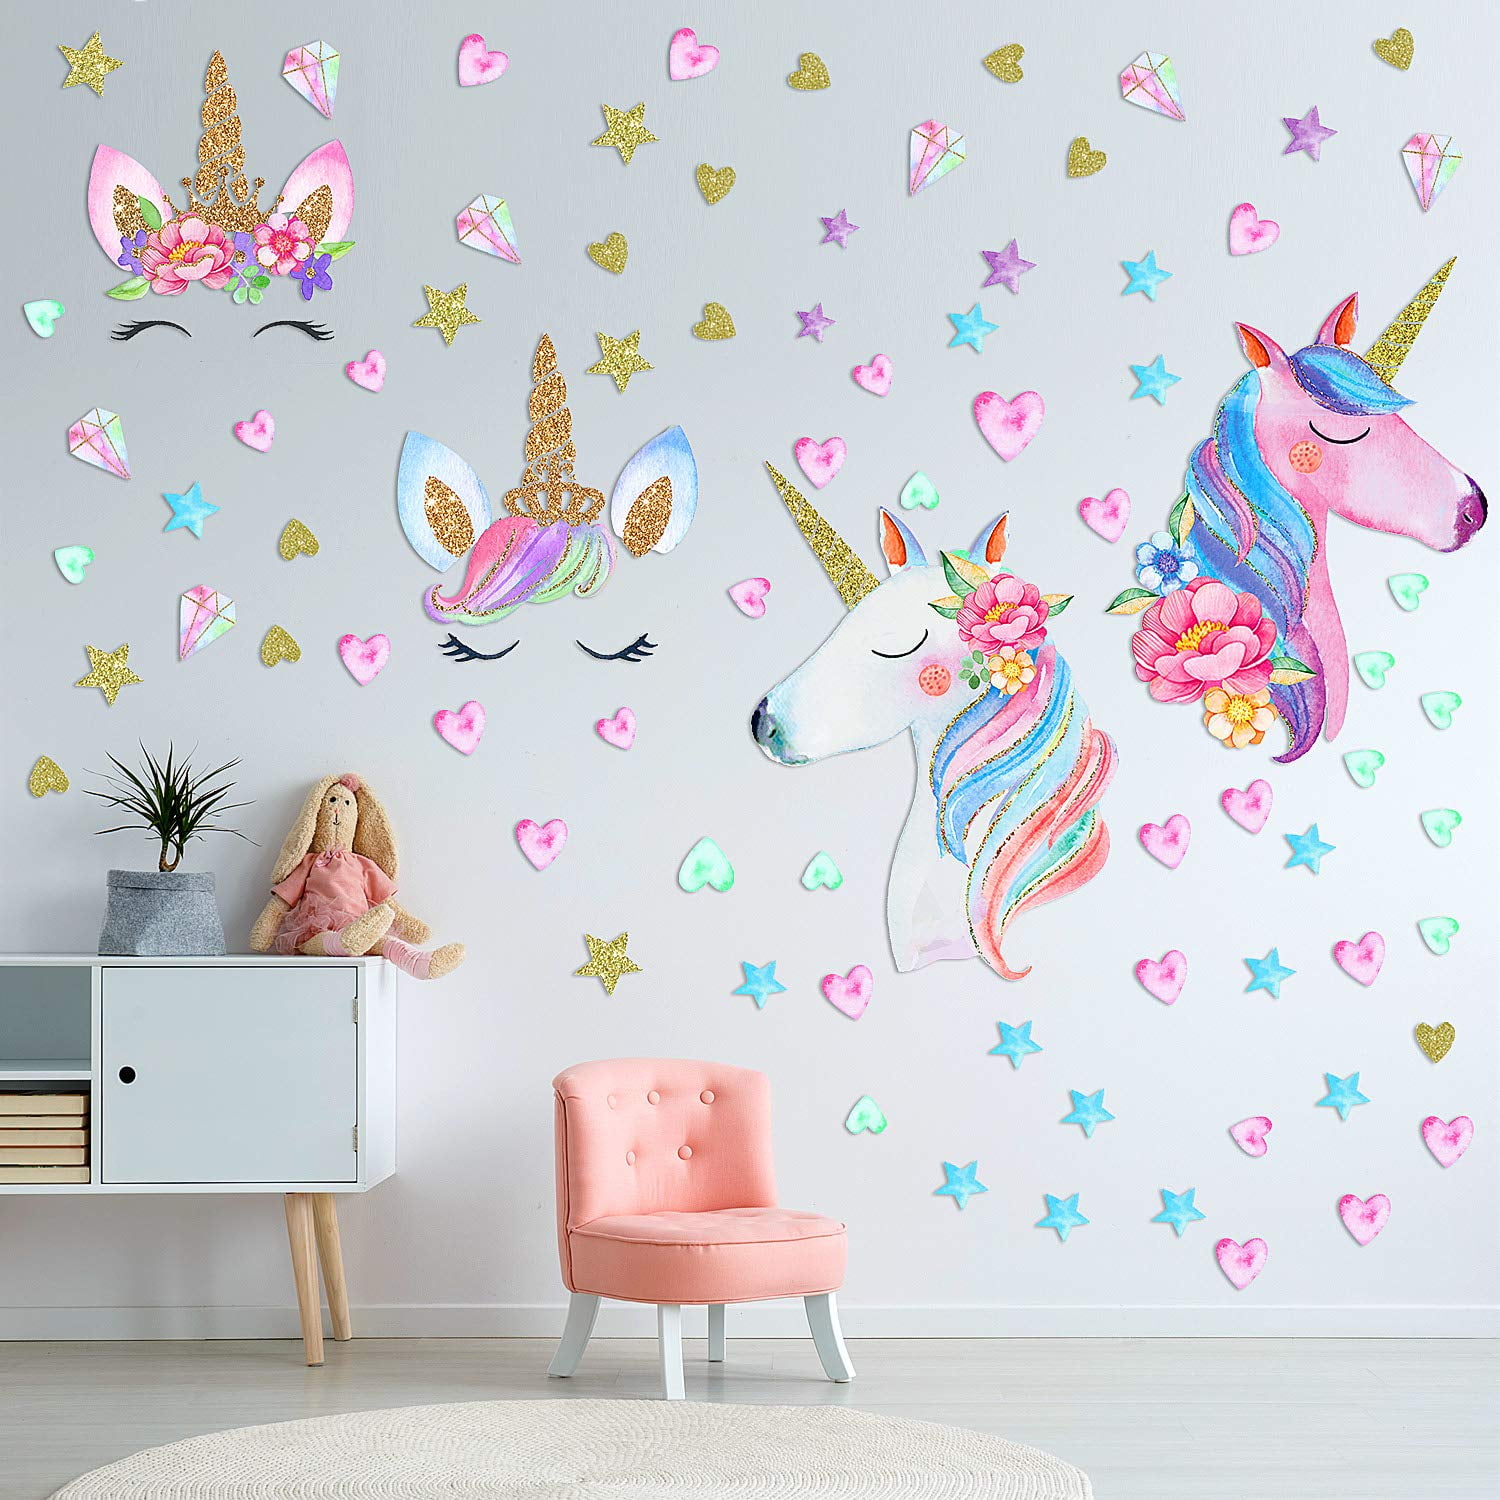 3 Sheets Unicorn Wall Decals Removable Unicorn Wall Sticker Decor for Girls Kids Bedroom Nursery Christmas Birthday Party Unicorn Bedroom Decor for Girls